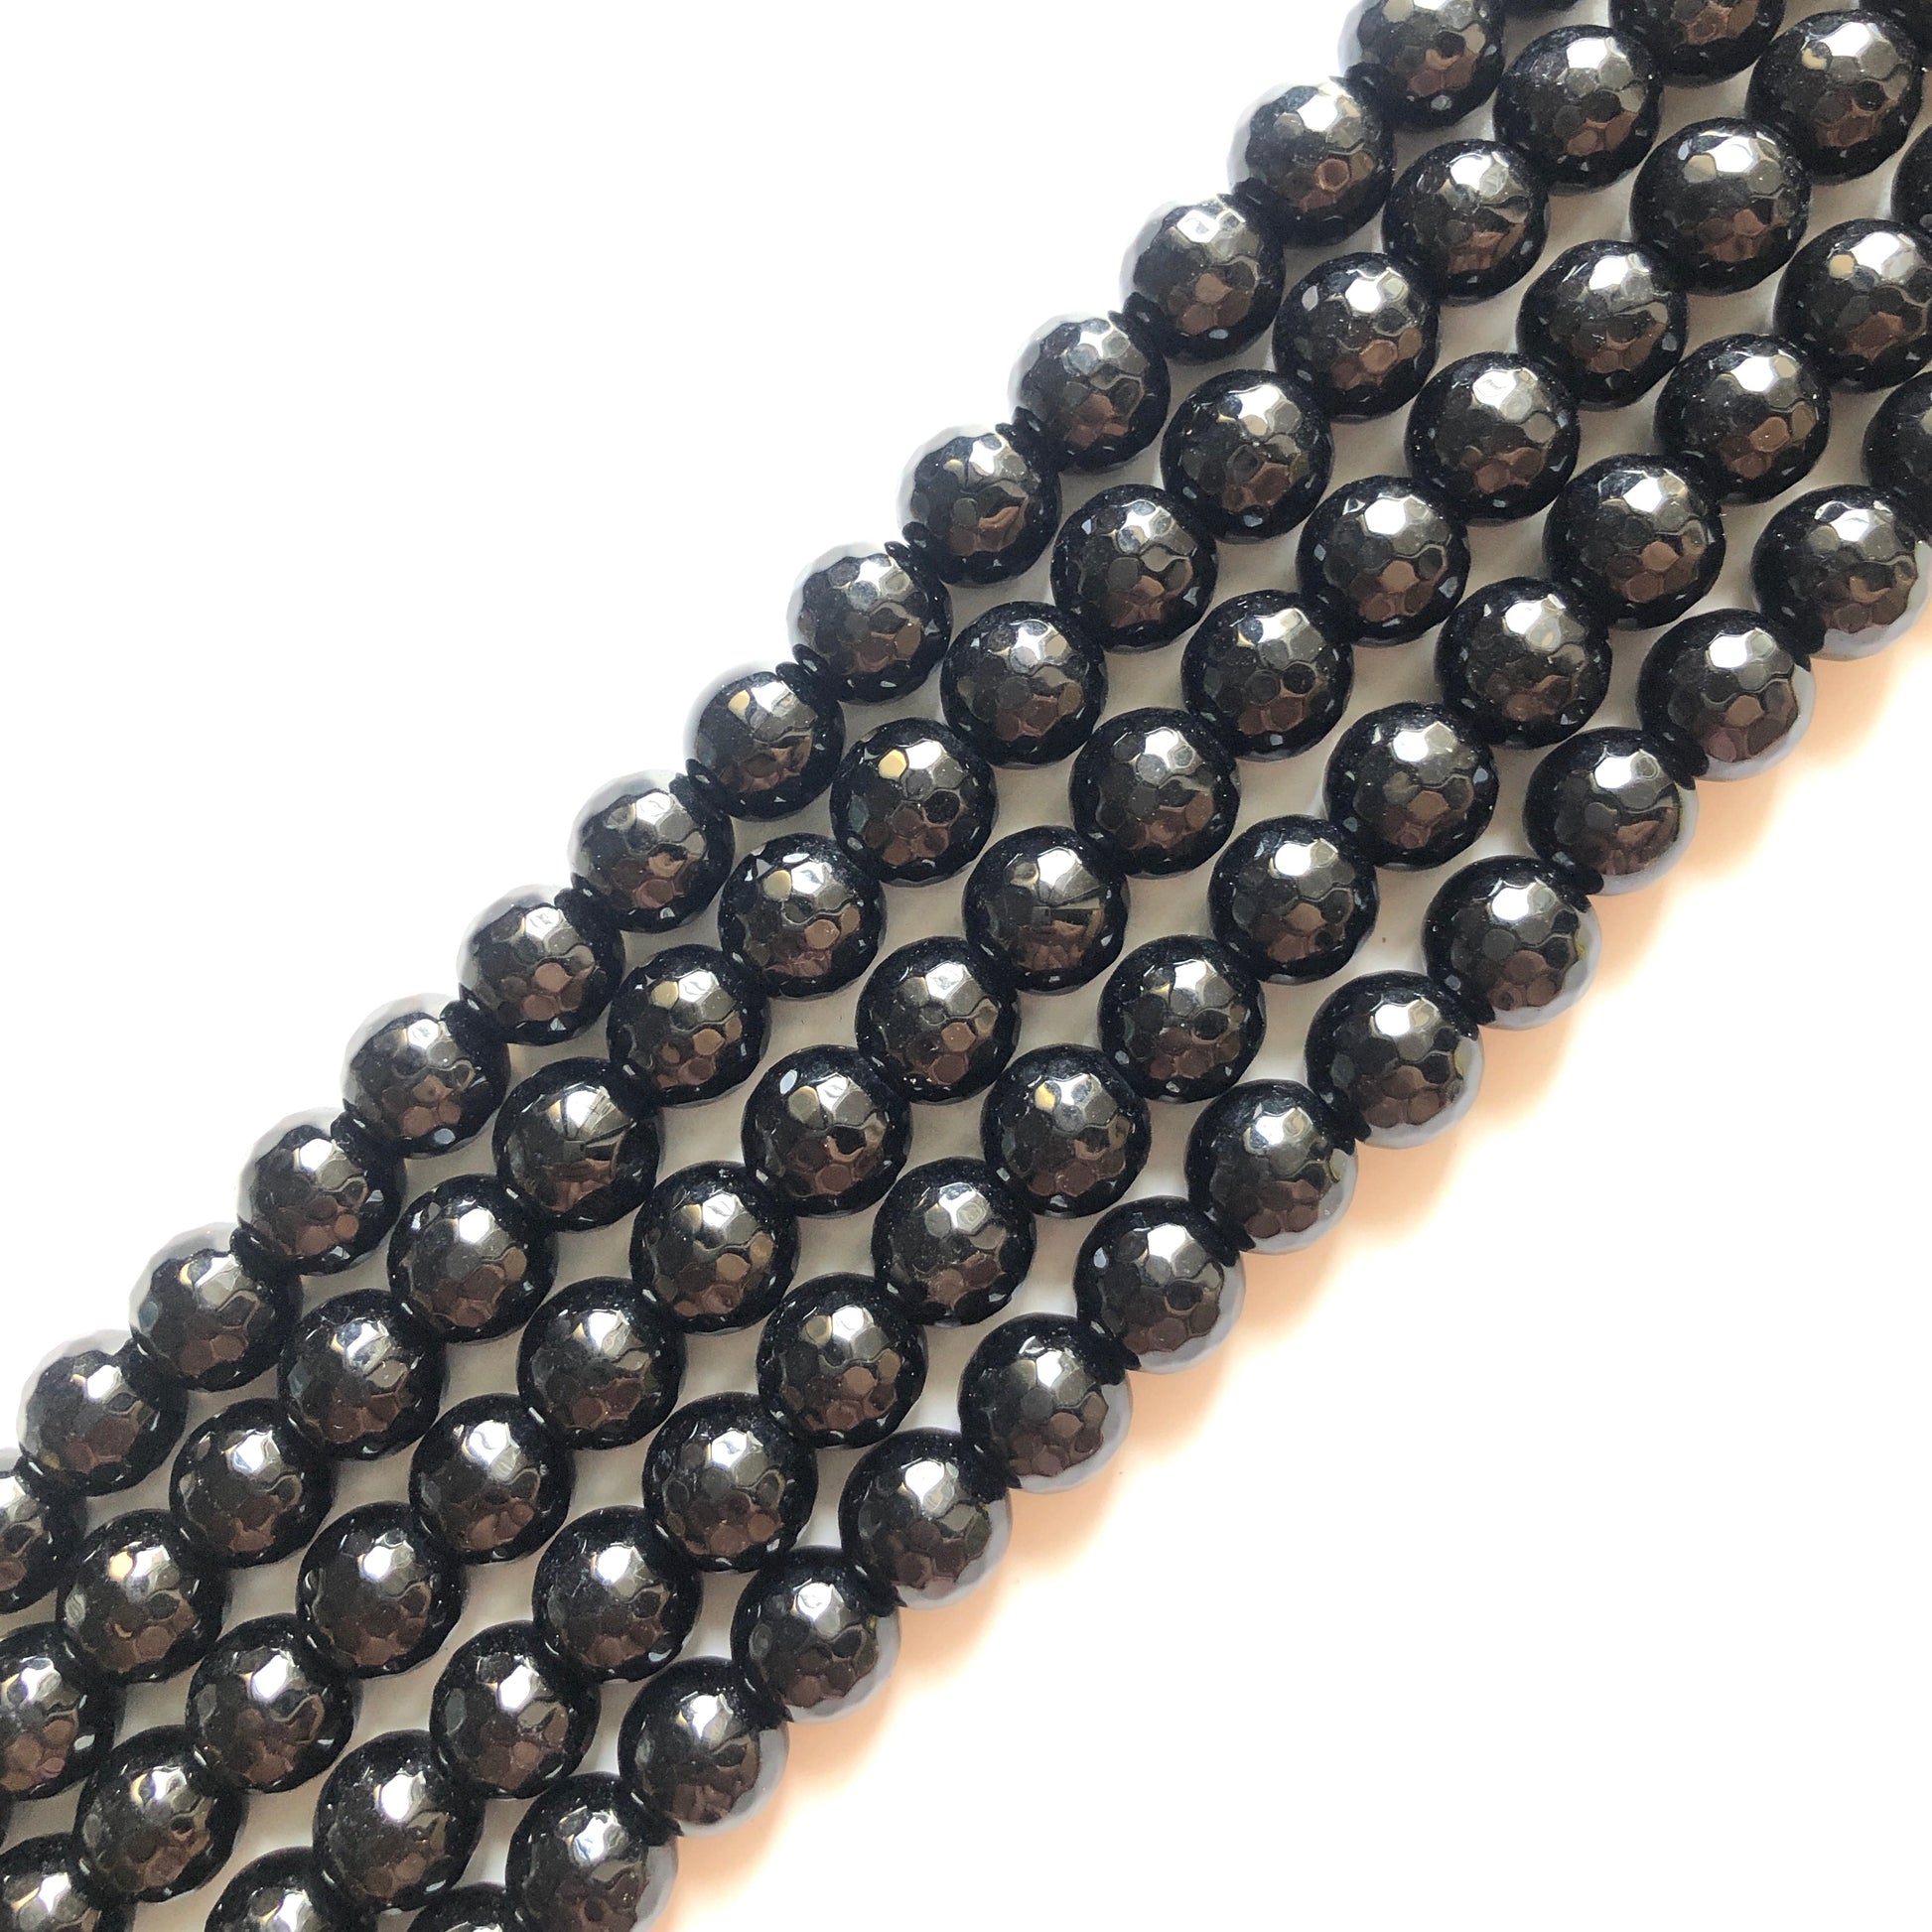 2 Strands/lot 10mm Black Faceted Jade Stone Beads Stone Beads Faceted Jade Beads Charms Beads Beyond